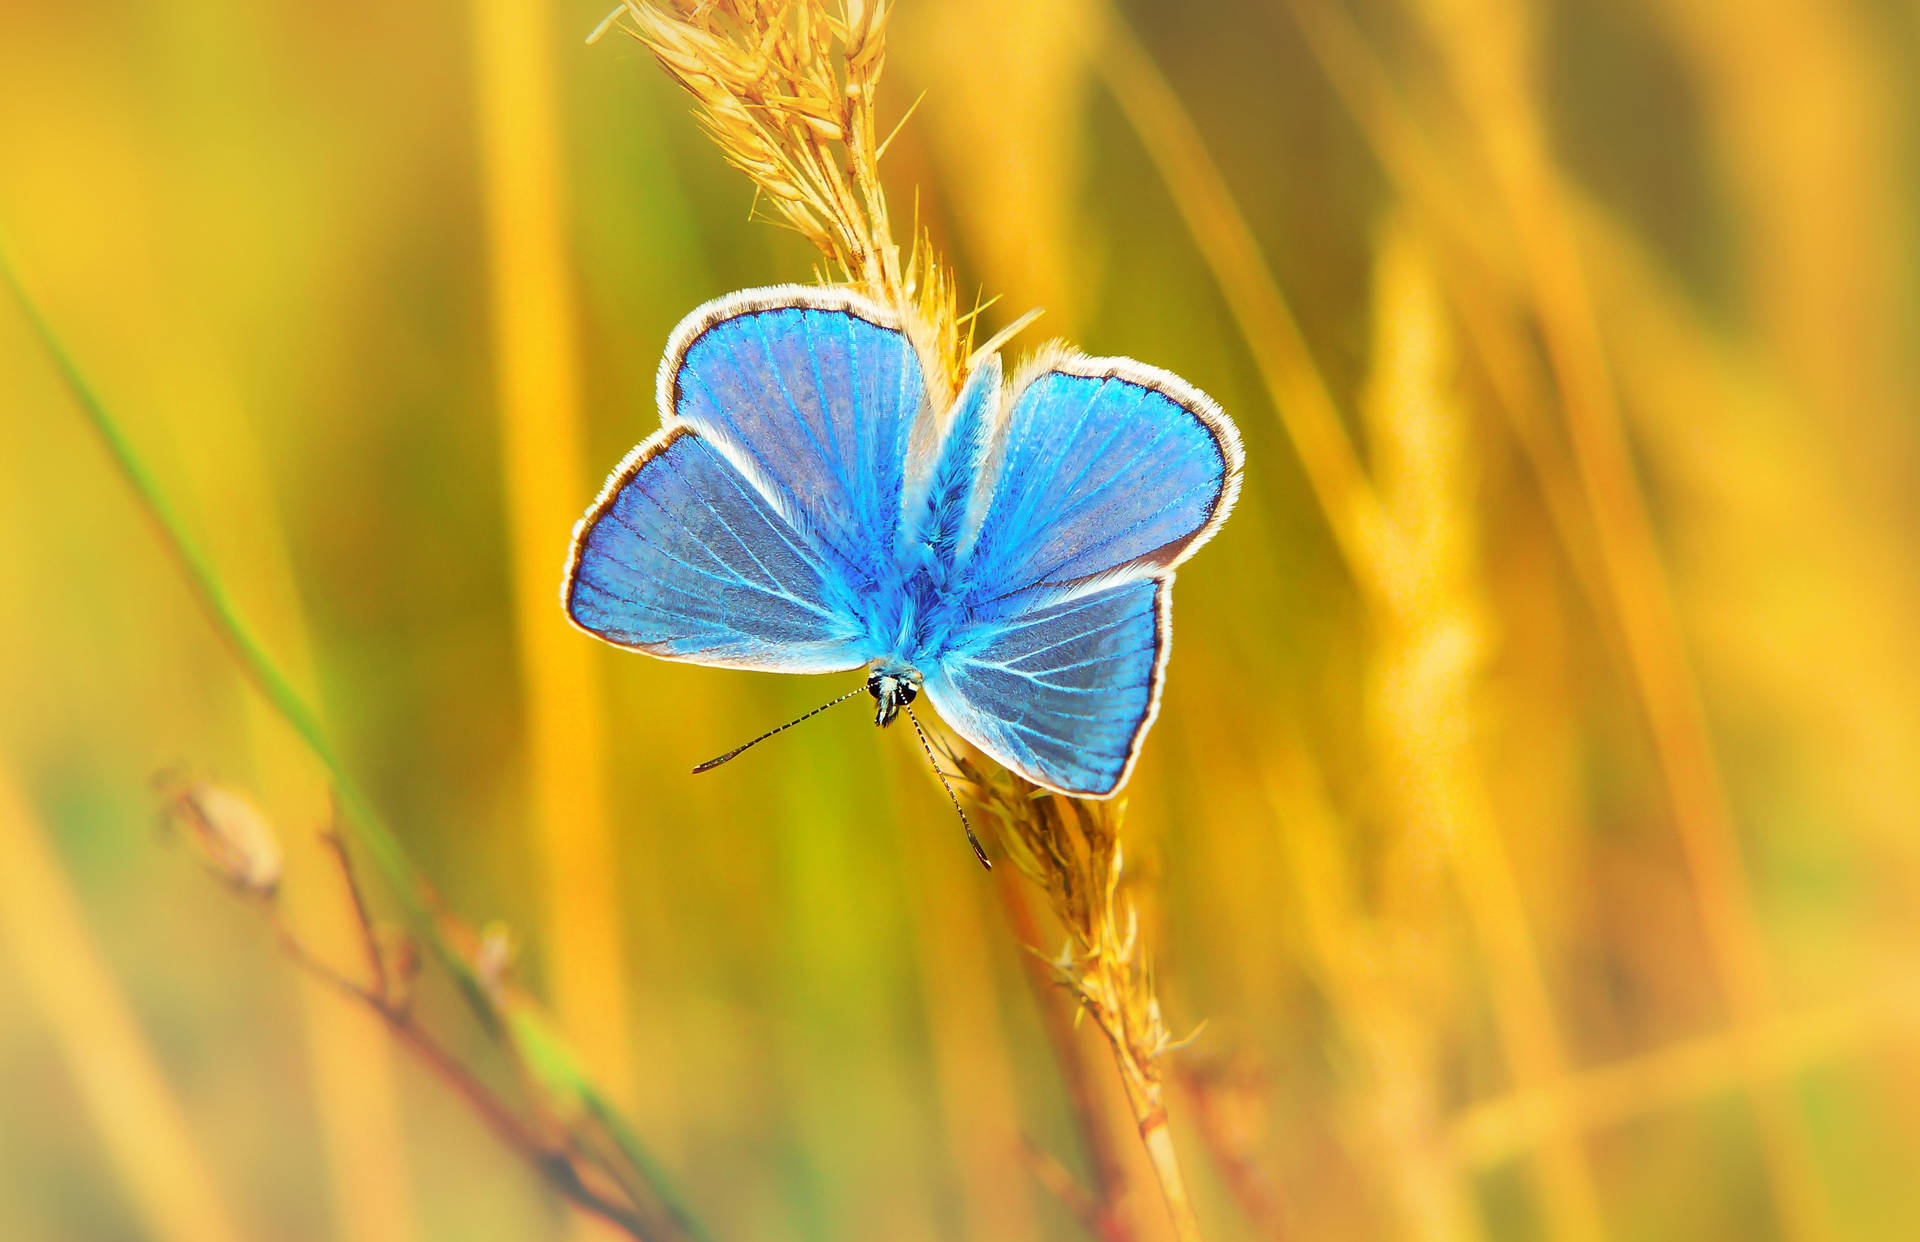 3750X2426 Blue Butterfly Wallpaper and Background